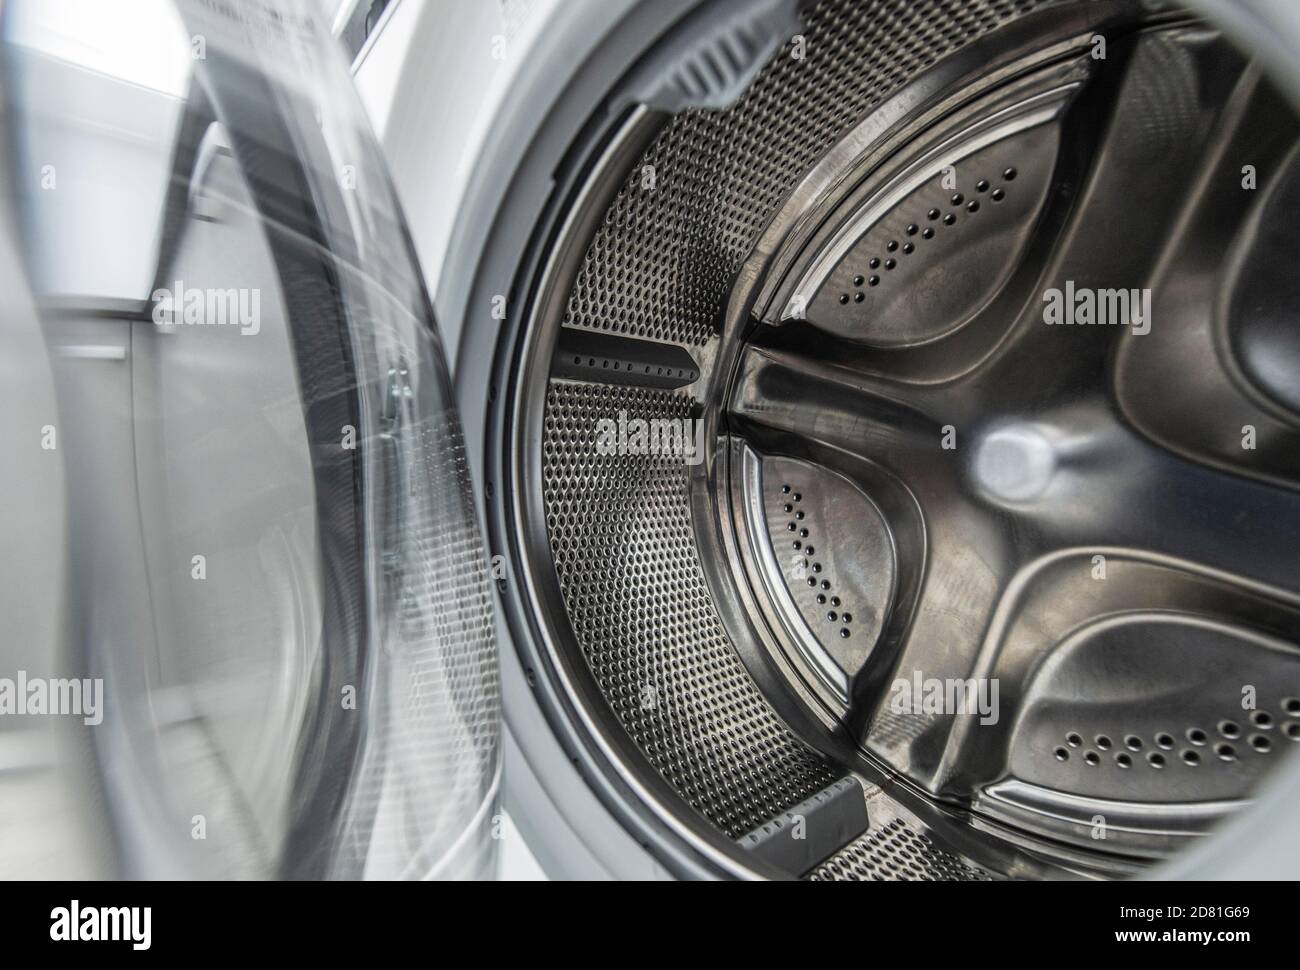 Home Appliance Used to Wash Laundry. Clean Washing Machine Drum Interior Stock Photo